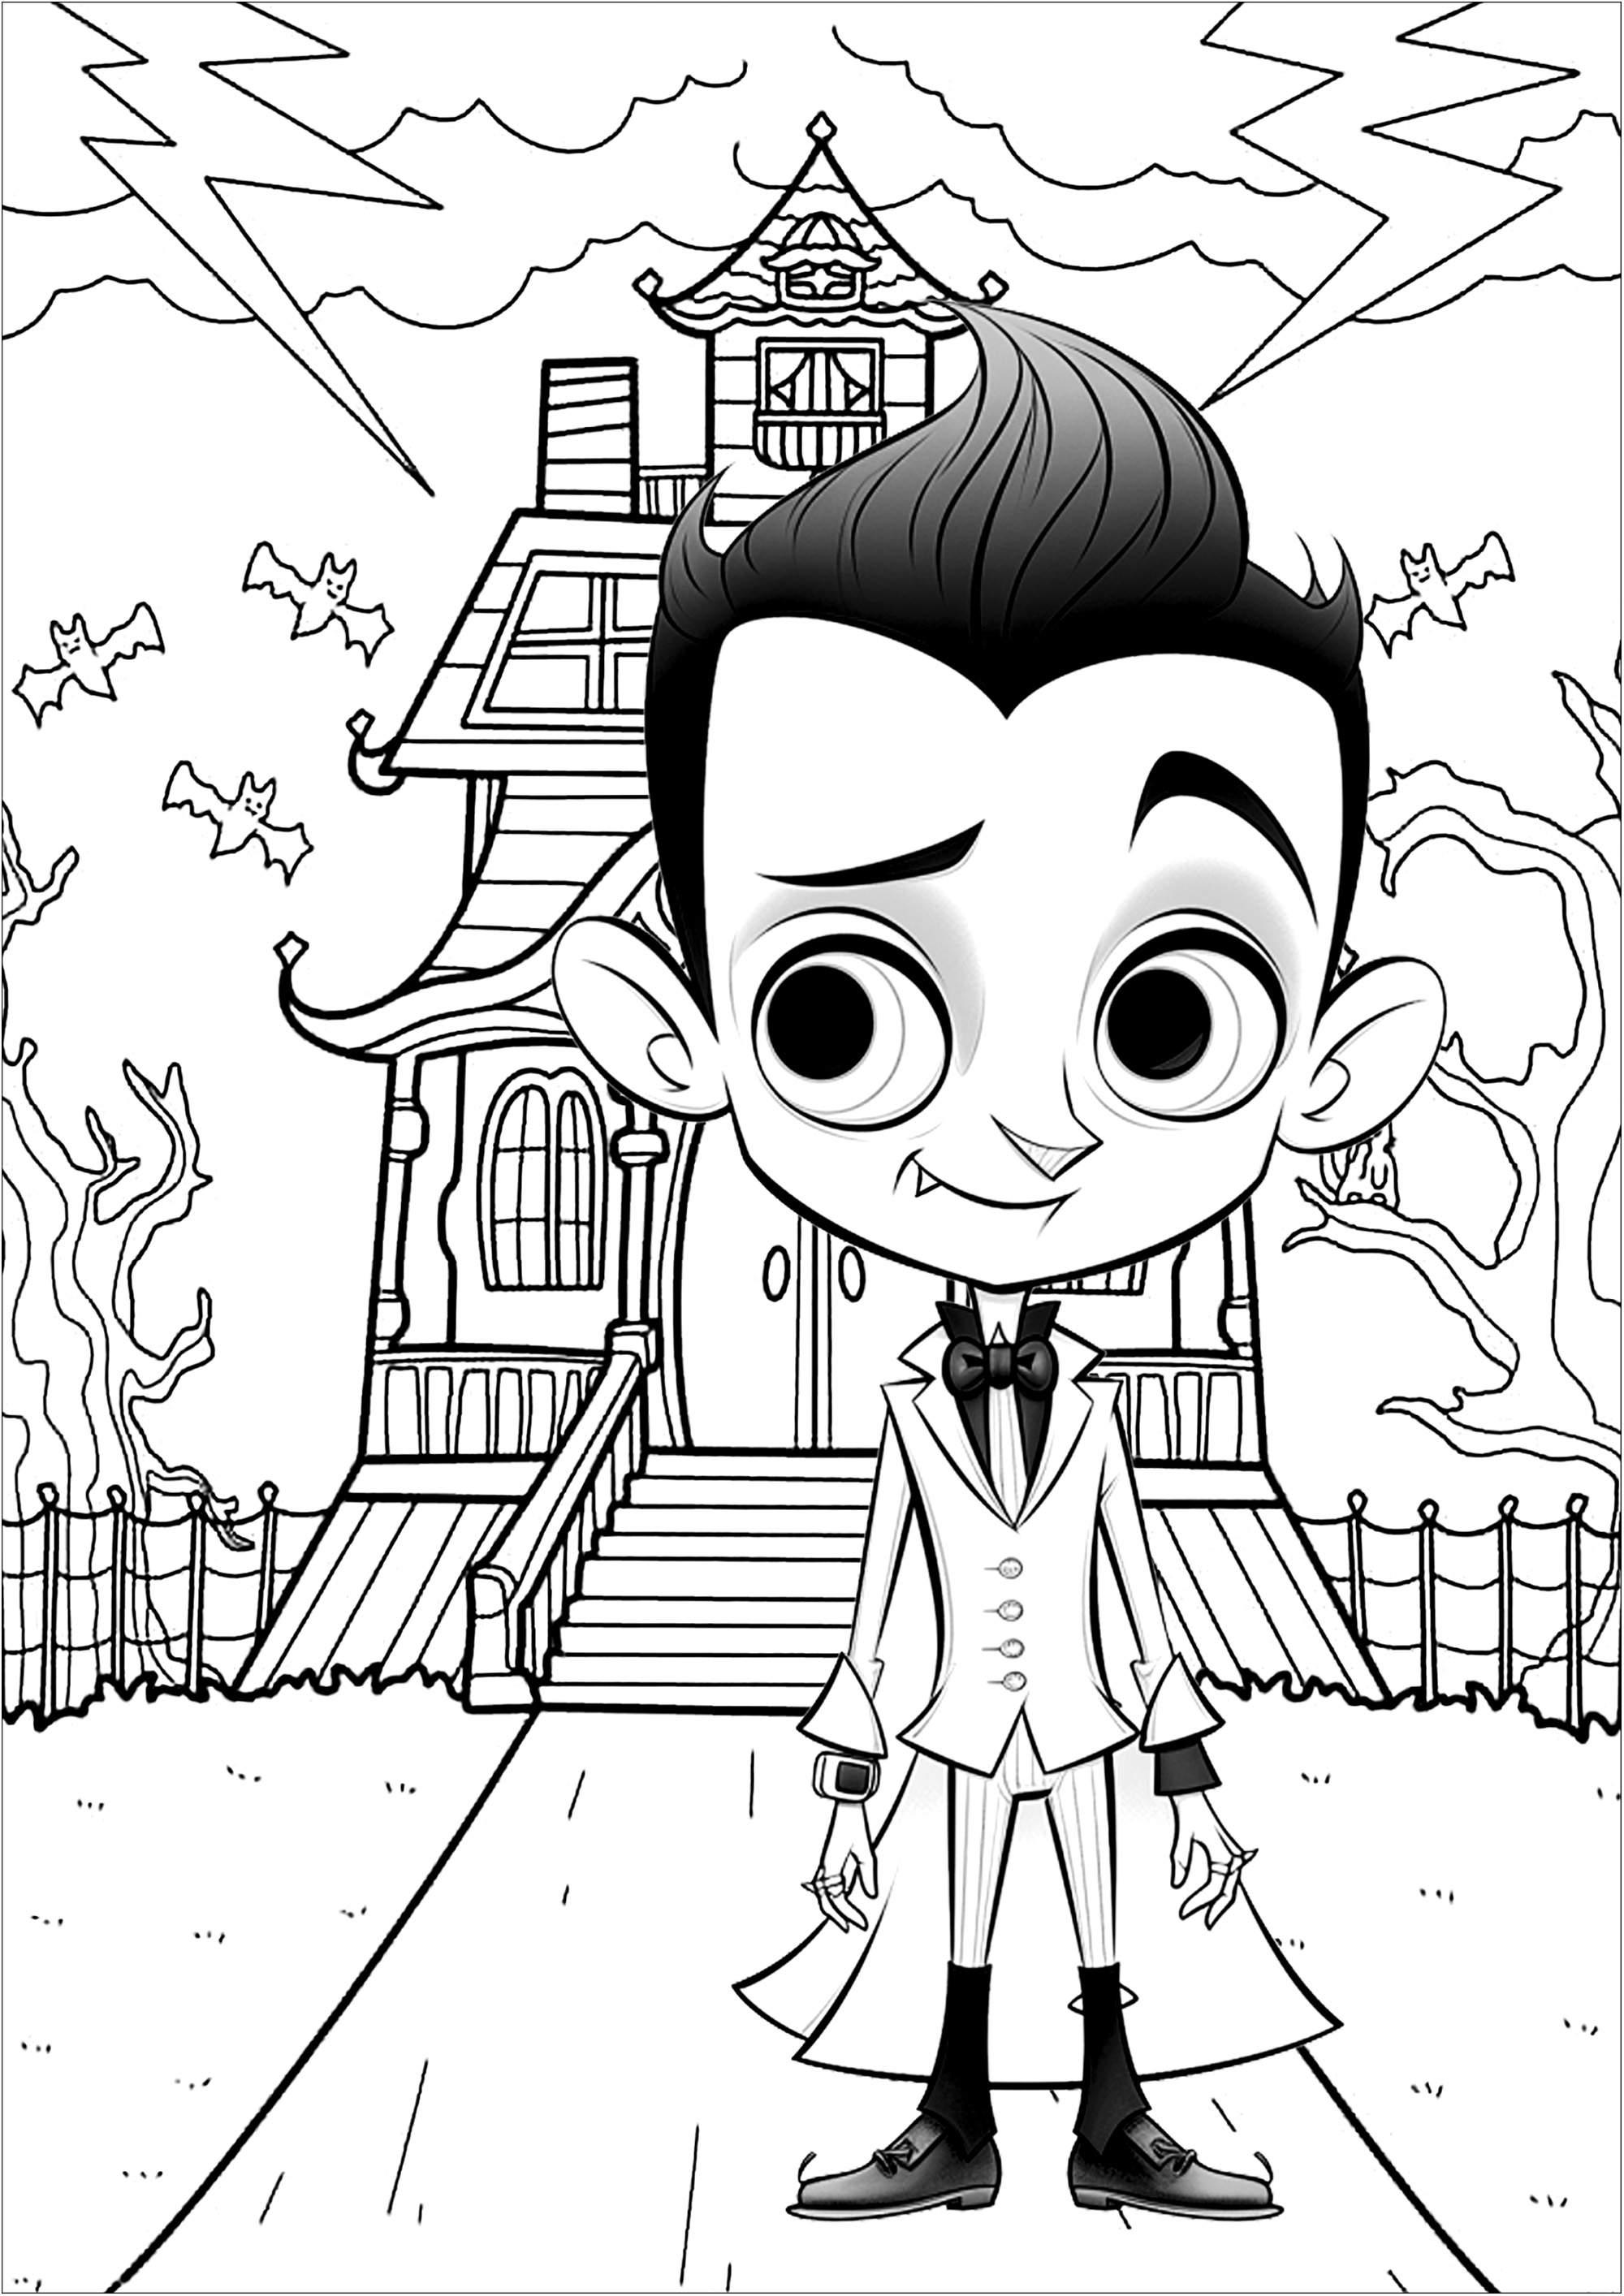 Young vampire in front of his castle. Young vampire standing in front of his castle.The castle is imposing and full of mystery... The sky is threatening and bats are flying around ...